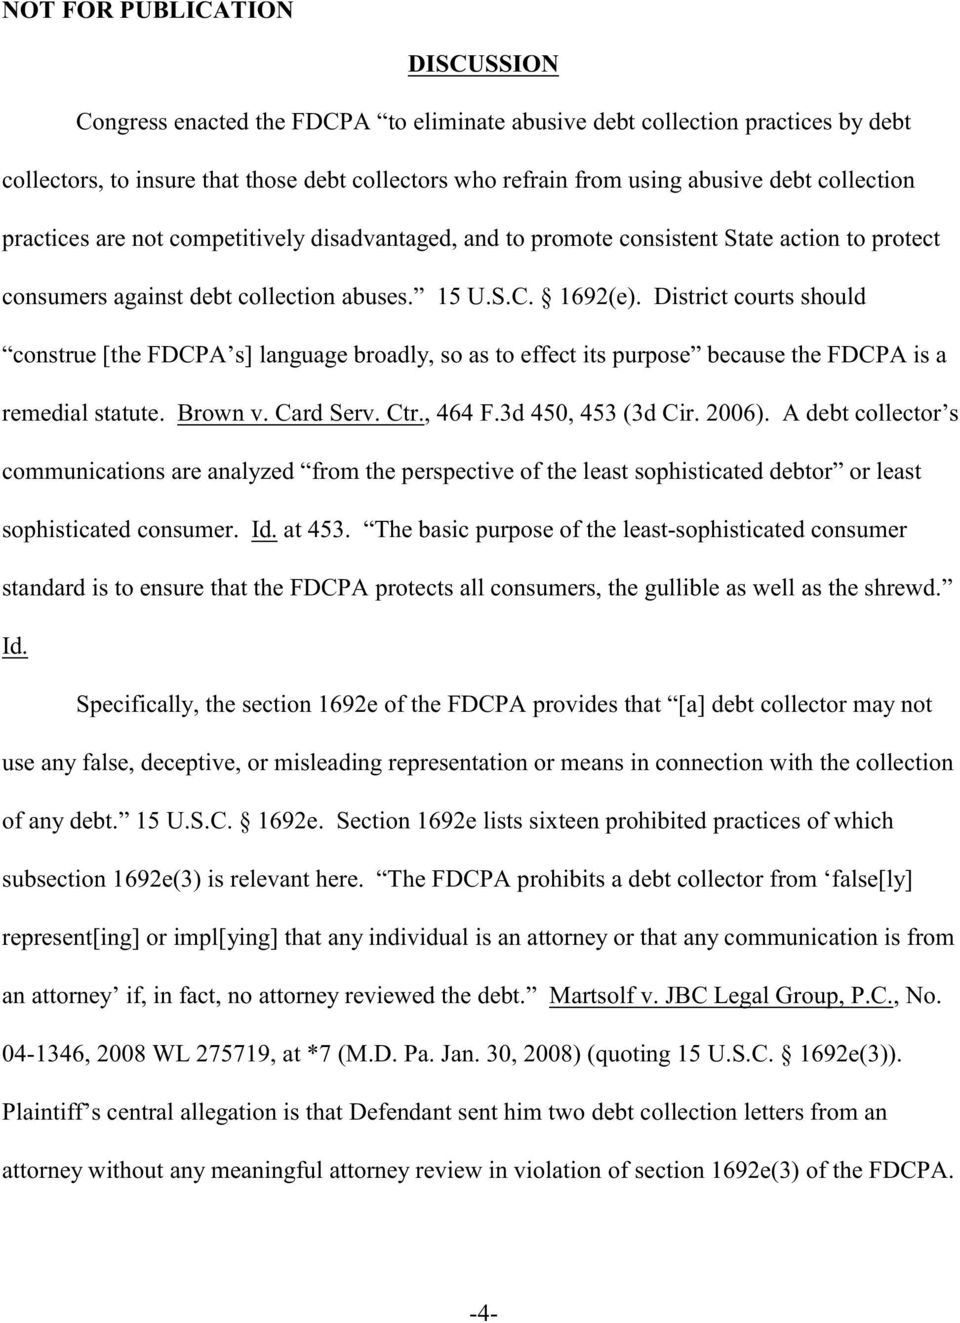 District courts should construe [the FDCPA s] language broadly, so as to effect its purpose because the FDCPA is a remedial statute. Brown v. Card Serv. Ctr., 464 F.3d 450, 453 (3d Cir. 2006).